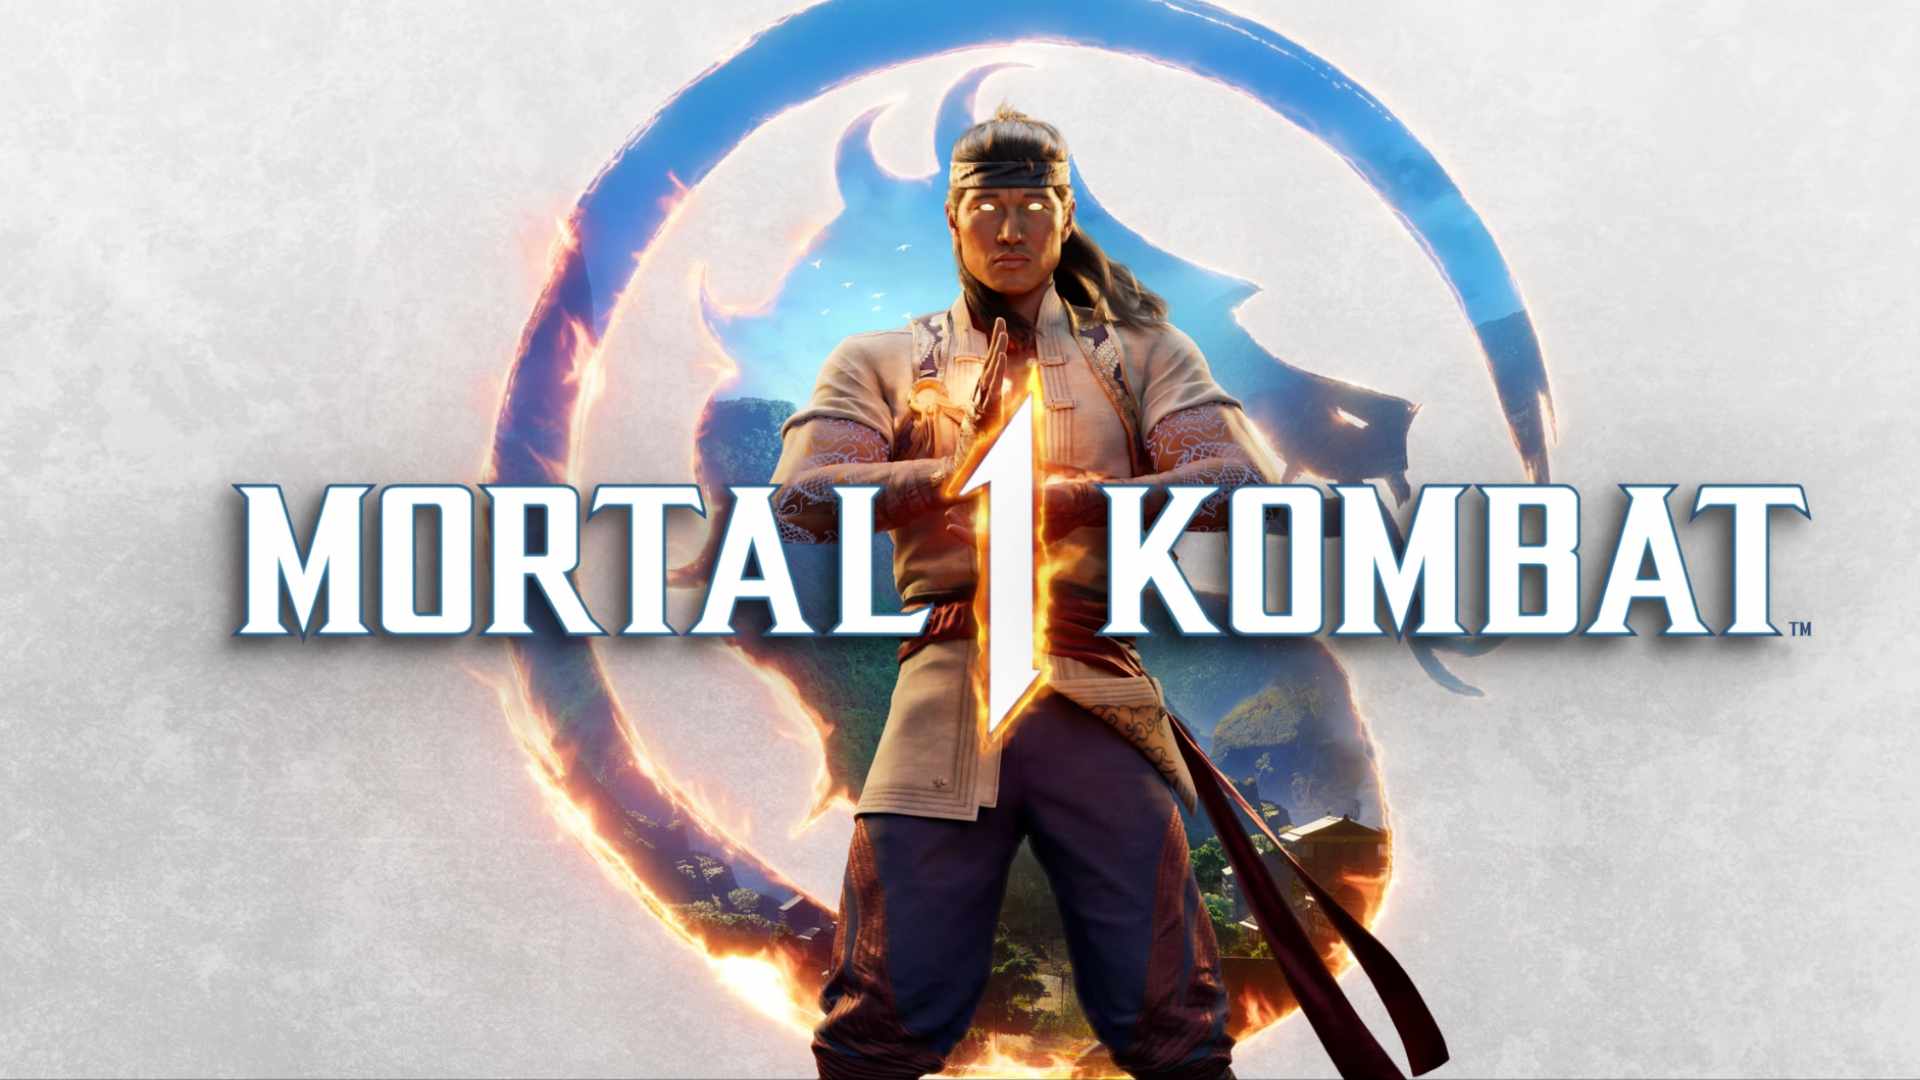 It's great that fans are getting another entry in Mortal Kombat but the gameplay still feels like it's stuck in the past.